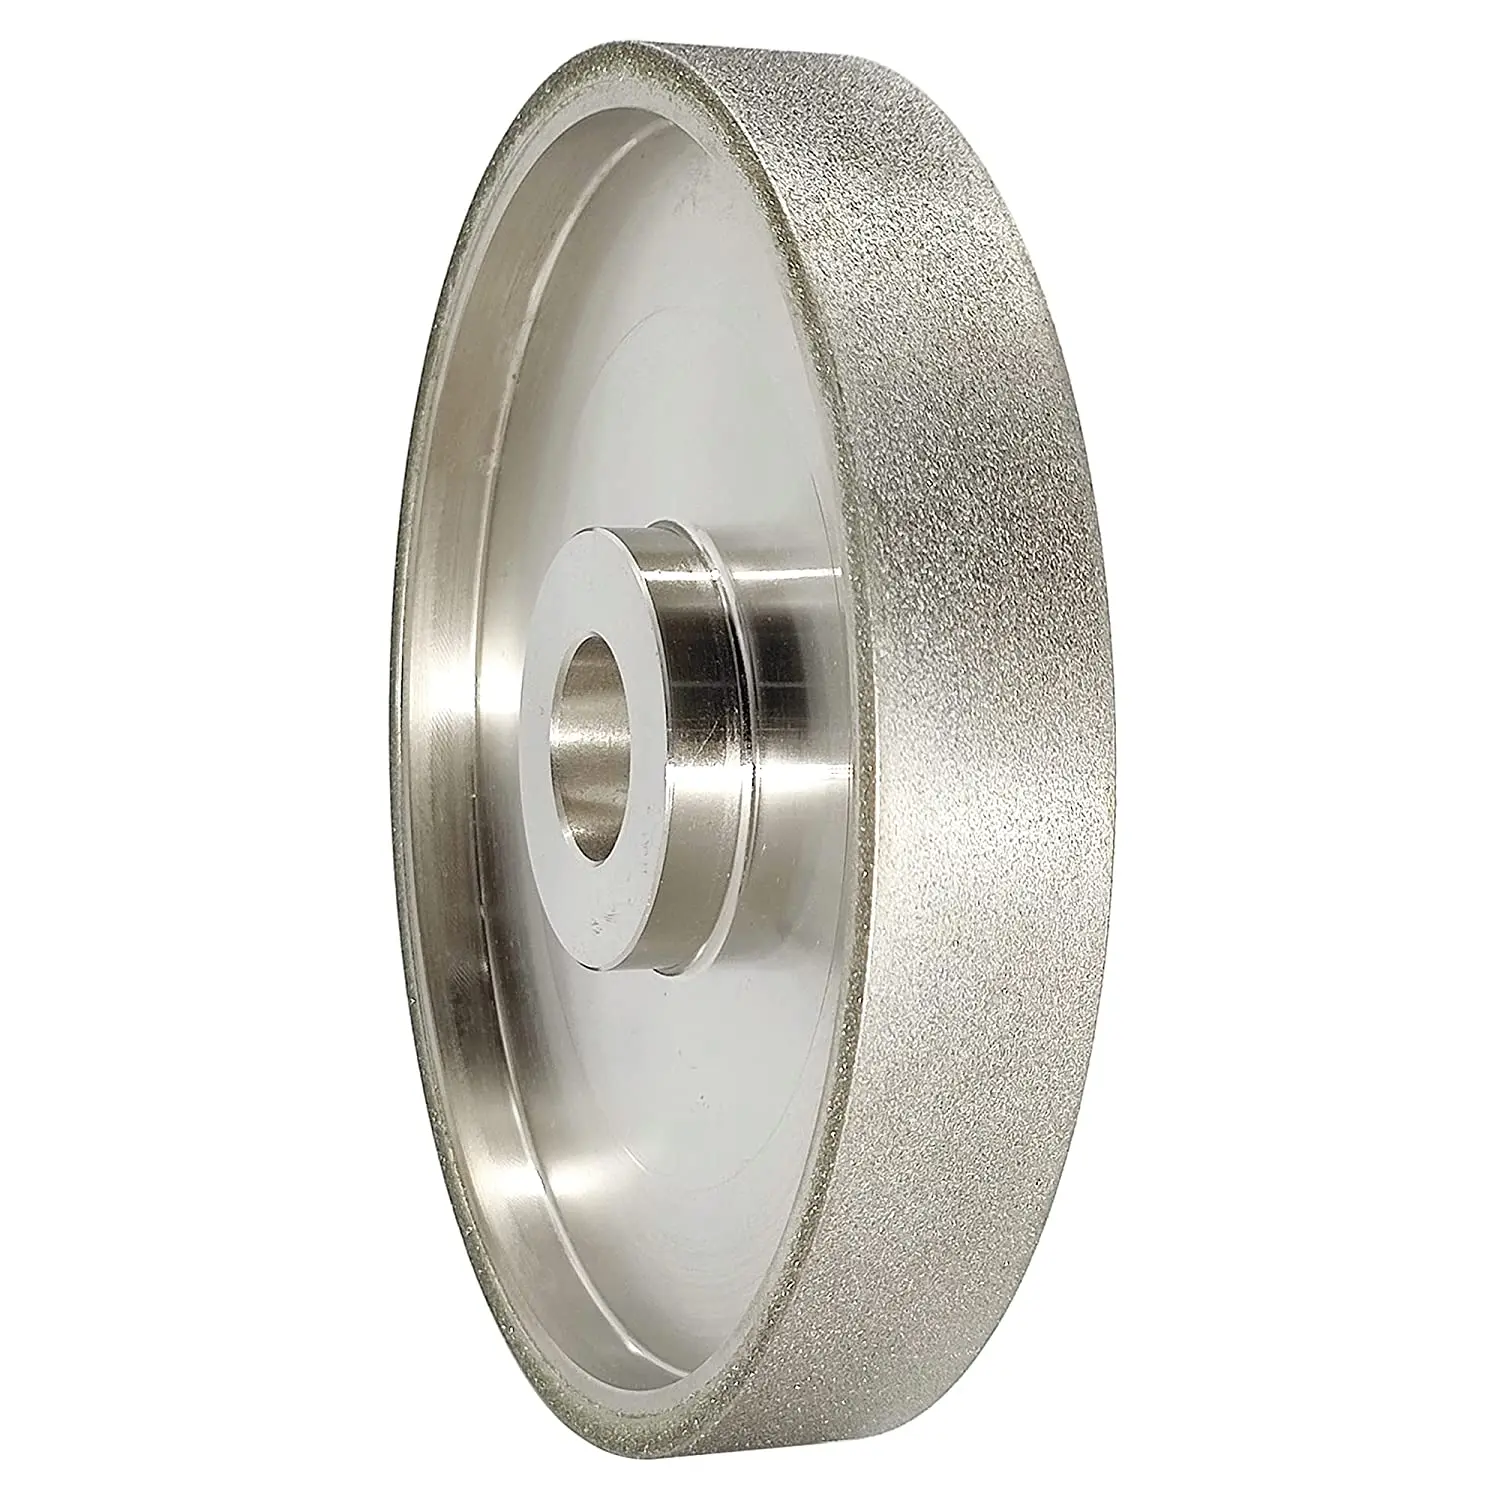 XMGT Hot Sale 35 1000 Grit Electroplated CBN Grinding Wheel used on Lapidary Grinding Machine CBN Diamond Grinding Wheel (11000007264476)